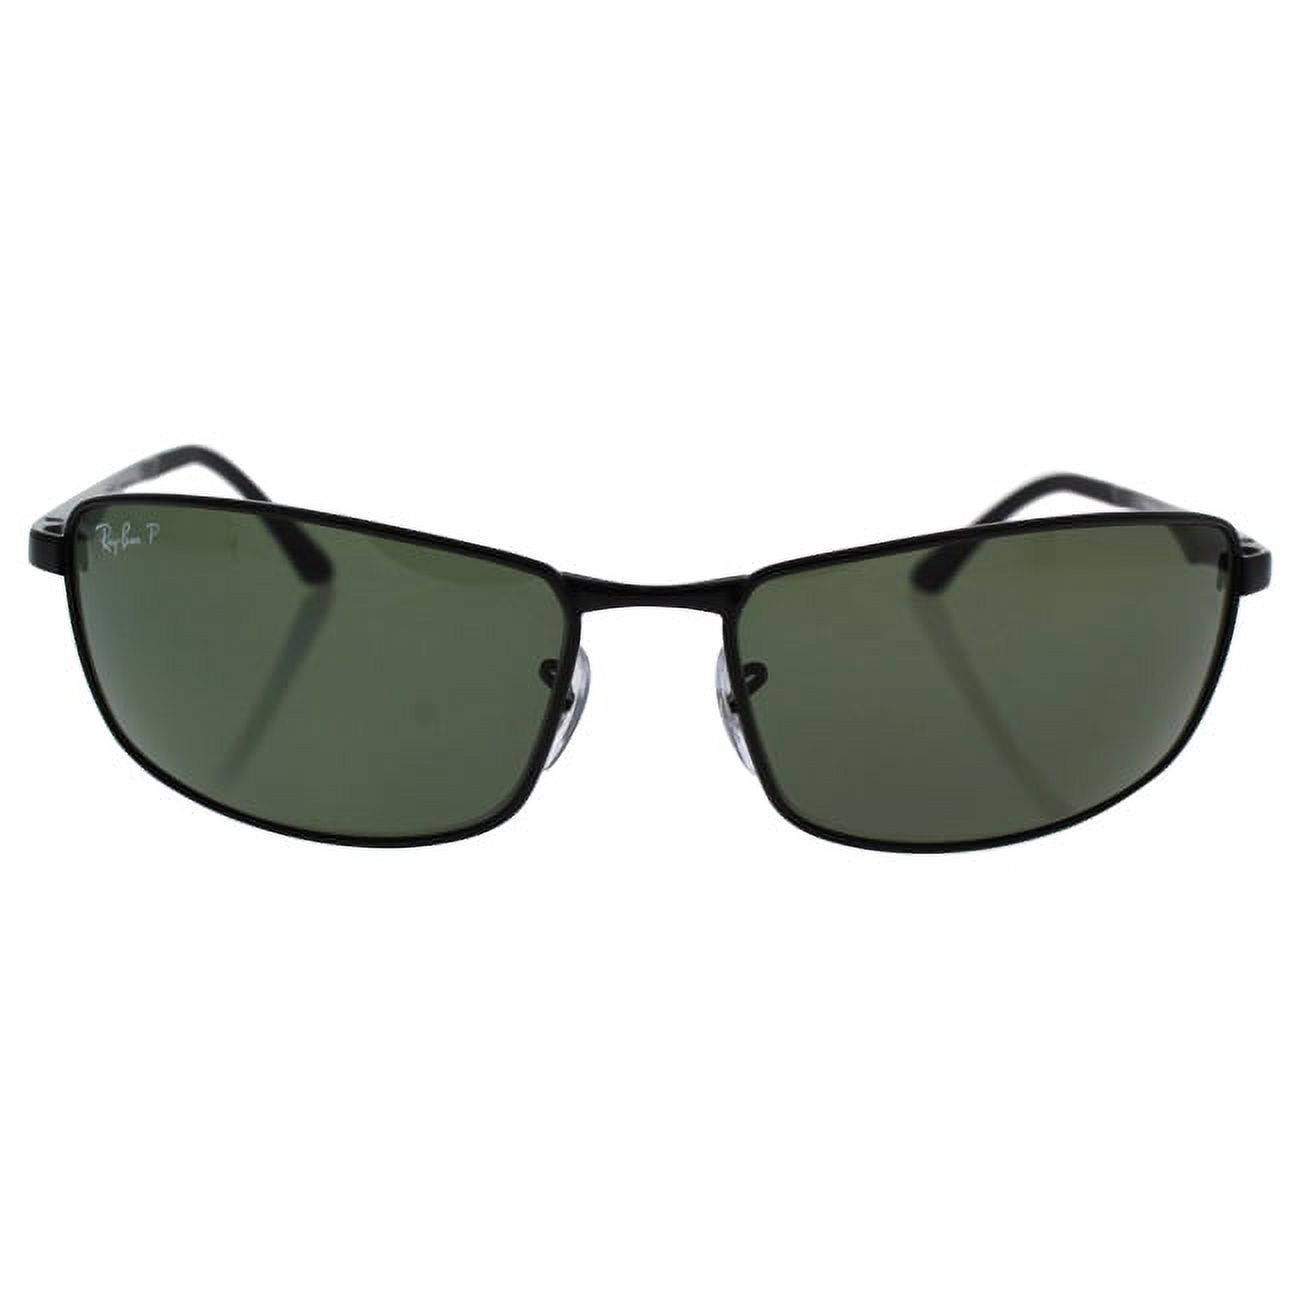 Ray Ban RB 3498 002/9A - Black/Green Polarized by Ray Ban for Men - 64-17-135 mm Sunglasses - image 1 of 3